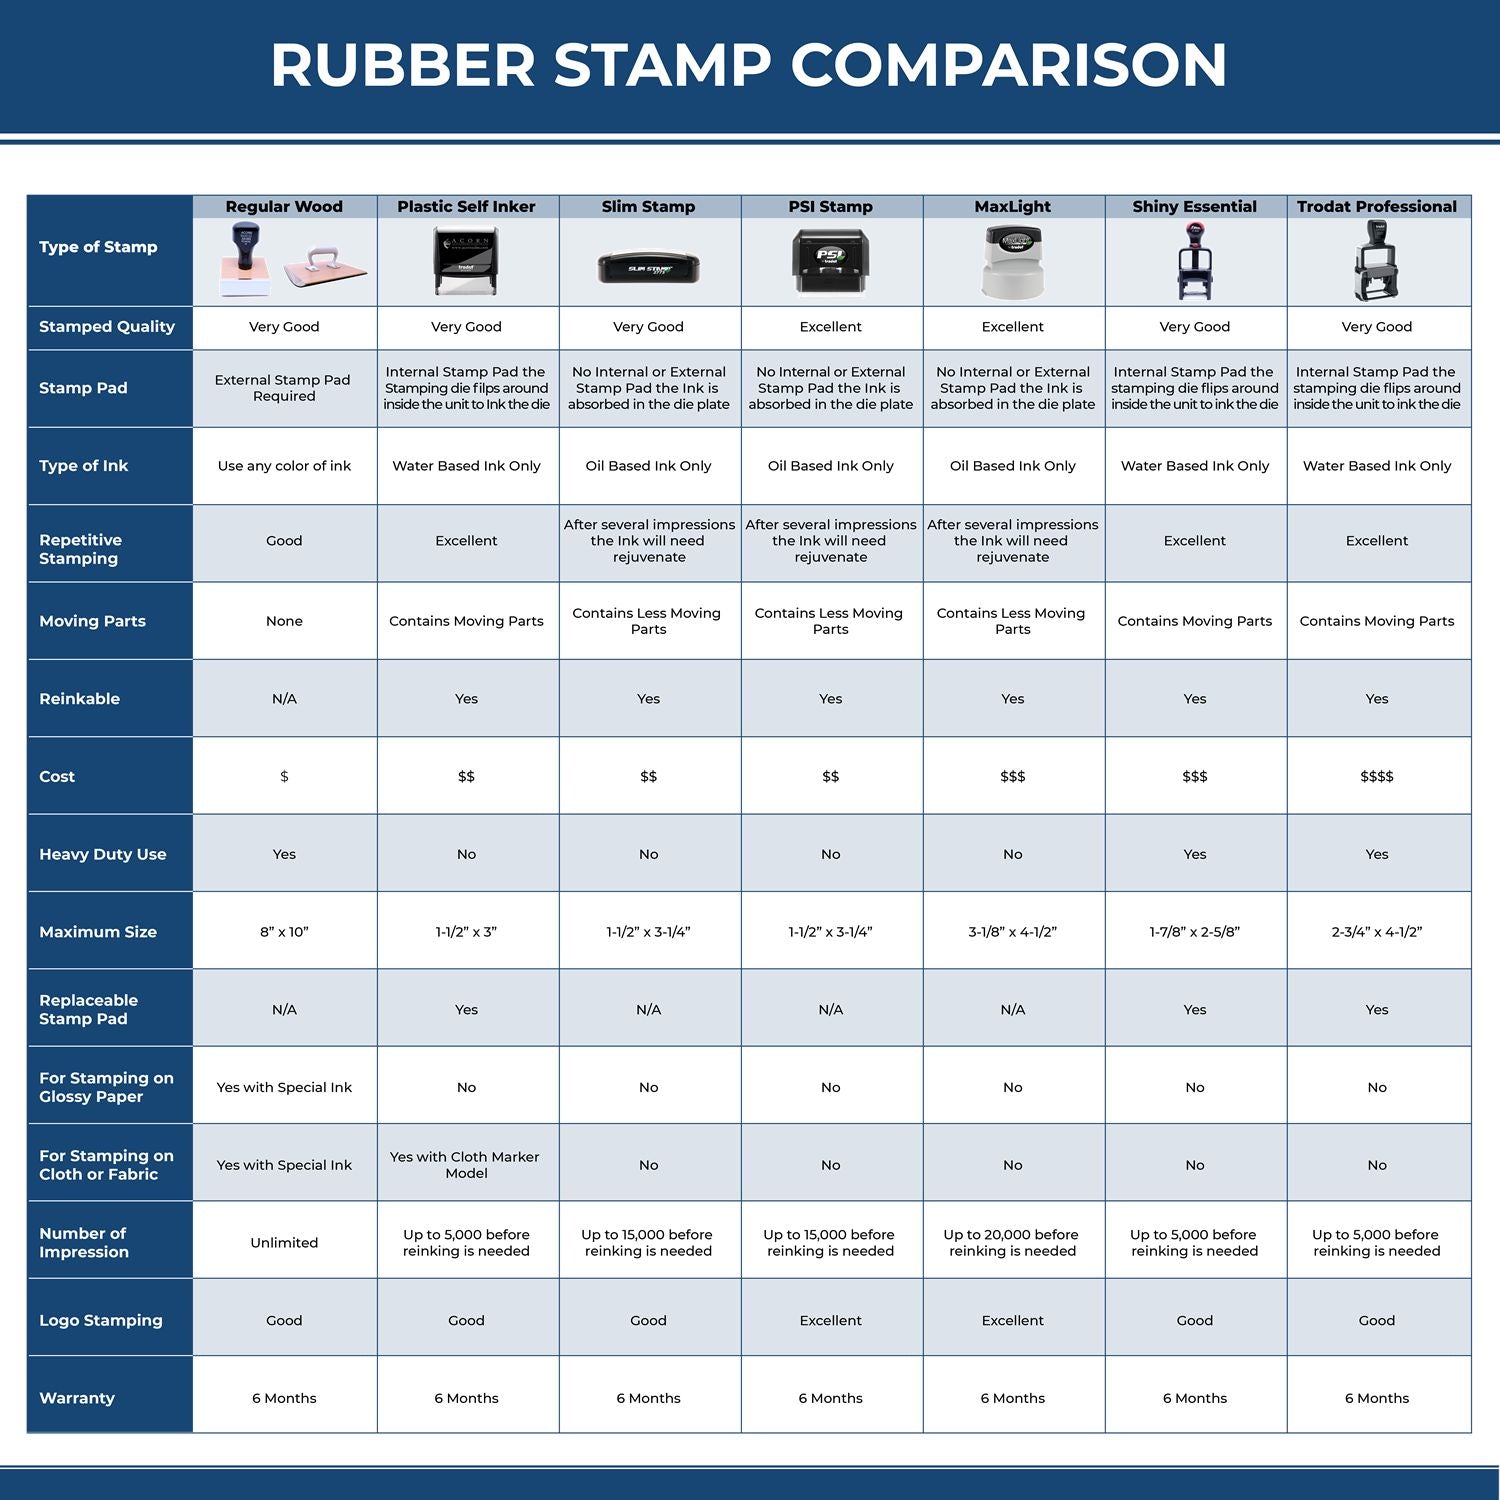 A comparison chart for the different types of mount models available for the Self-Inking Nevada PE Stamp.